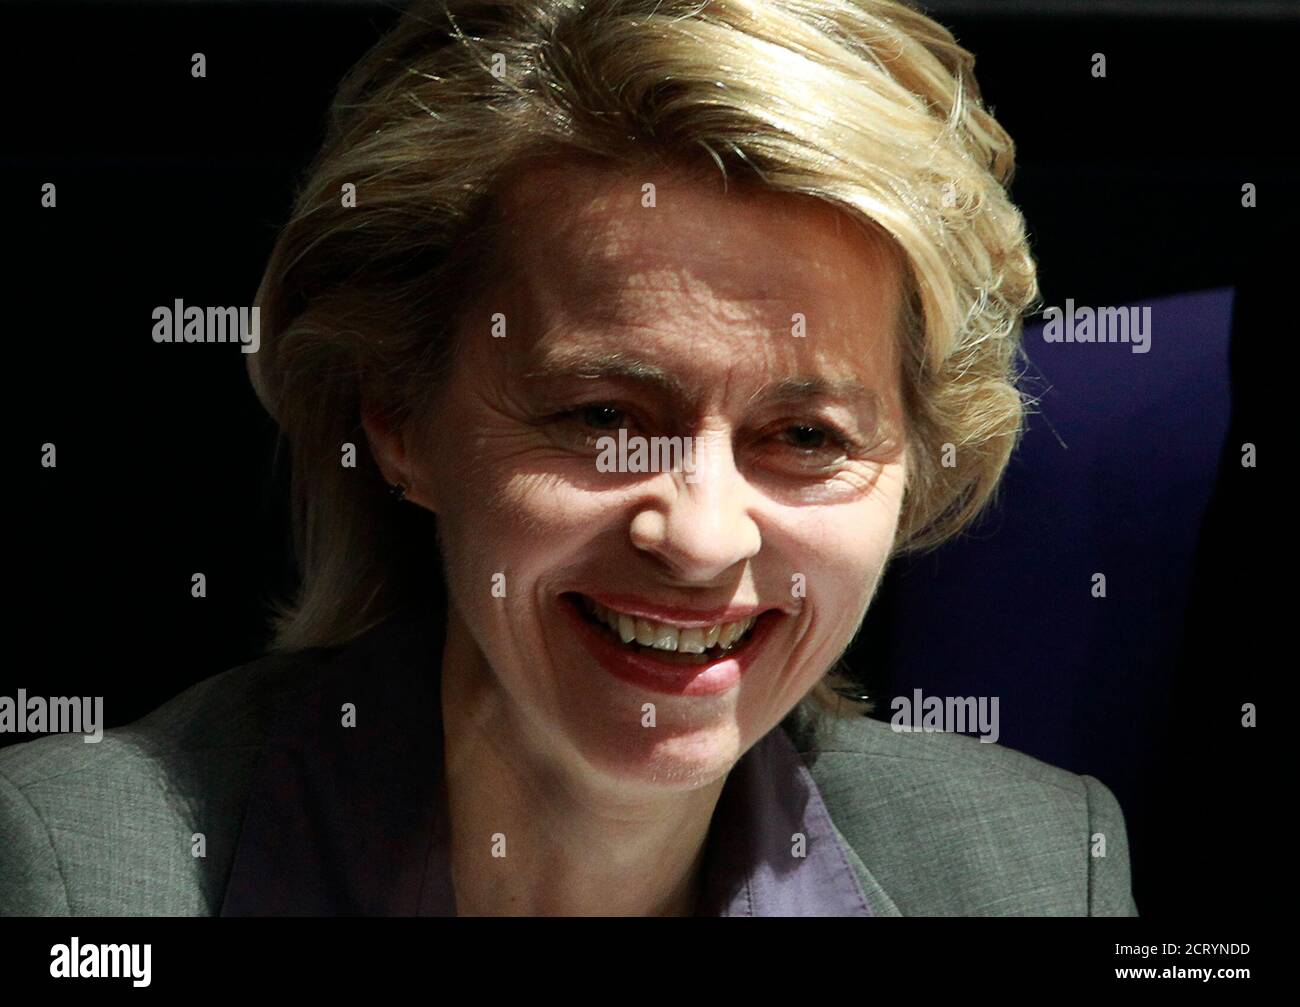 German Labour Minister Ursula von der Leyen smiles after the lower house of parliament, the Bundestag, voted on a reform of the minimum jobseekers allowance Hartz IV, in Berlin, February 25, 2011. REUTERS/Thomas Peter  (GERMANY - Tags: POLITICS HEADSHOT) Stock Photo